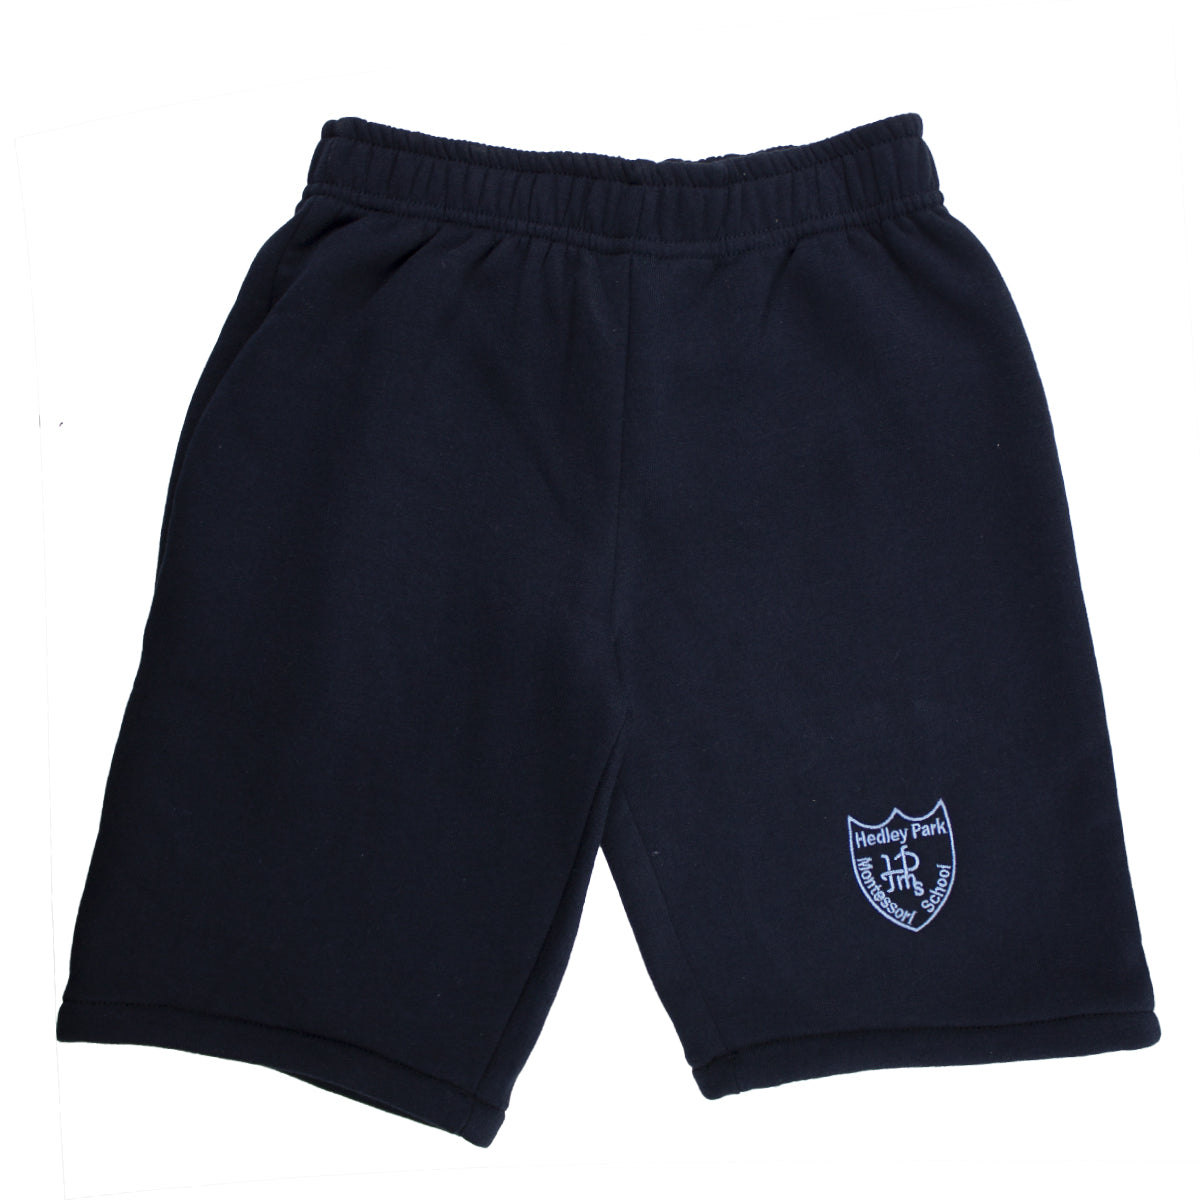 A photo of the Hedley Park Shorts in Navy with embroidered School Crest on left leg.